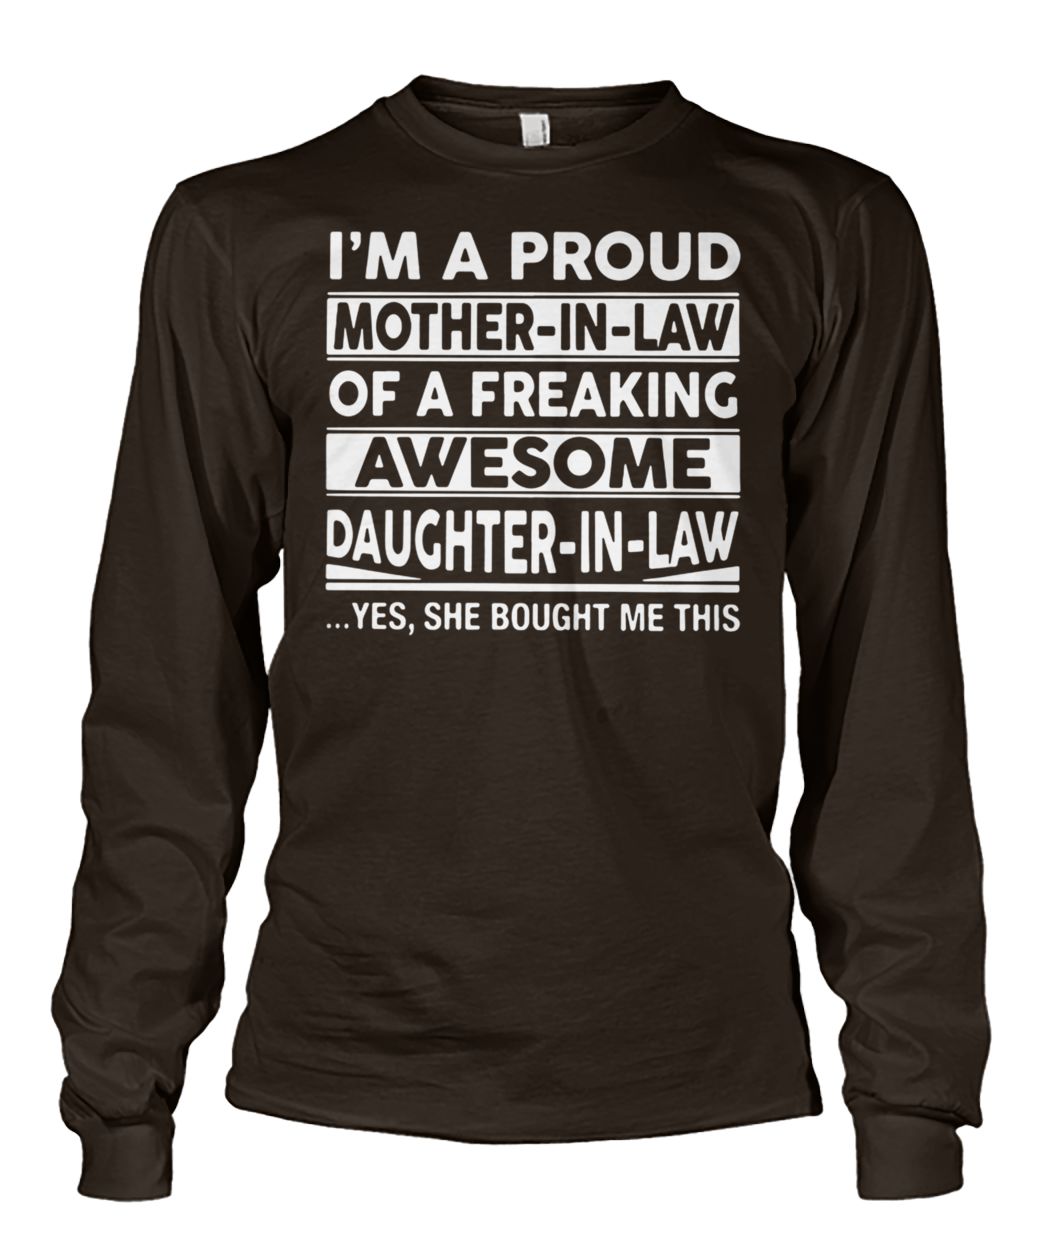 I'm a proud mother-in-law of a freaking awesome daughter-in-law yes she bought me this unisex long sleeve